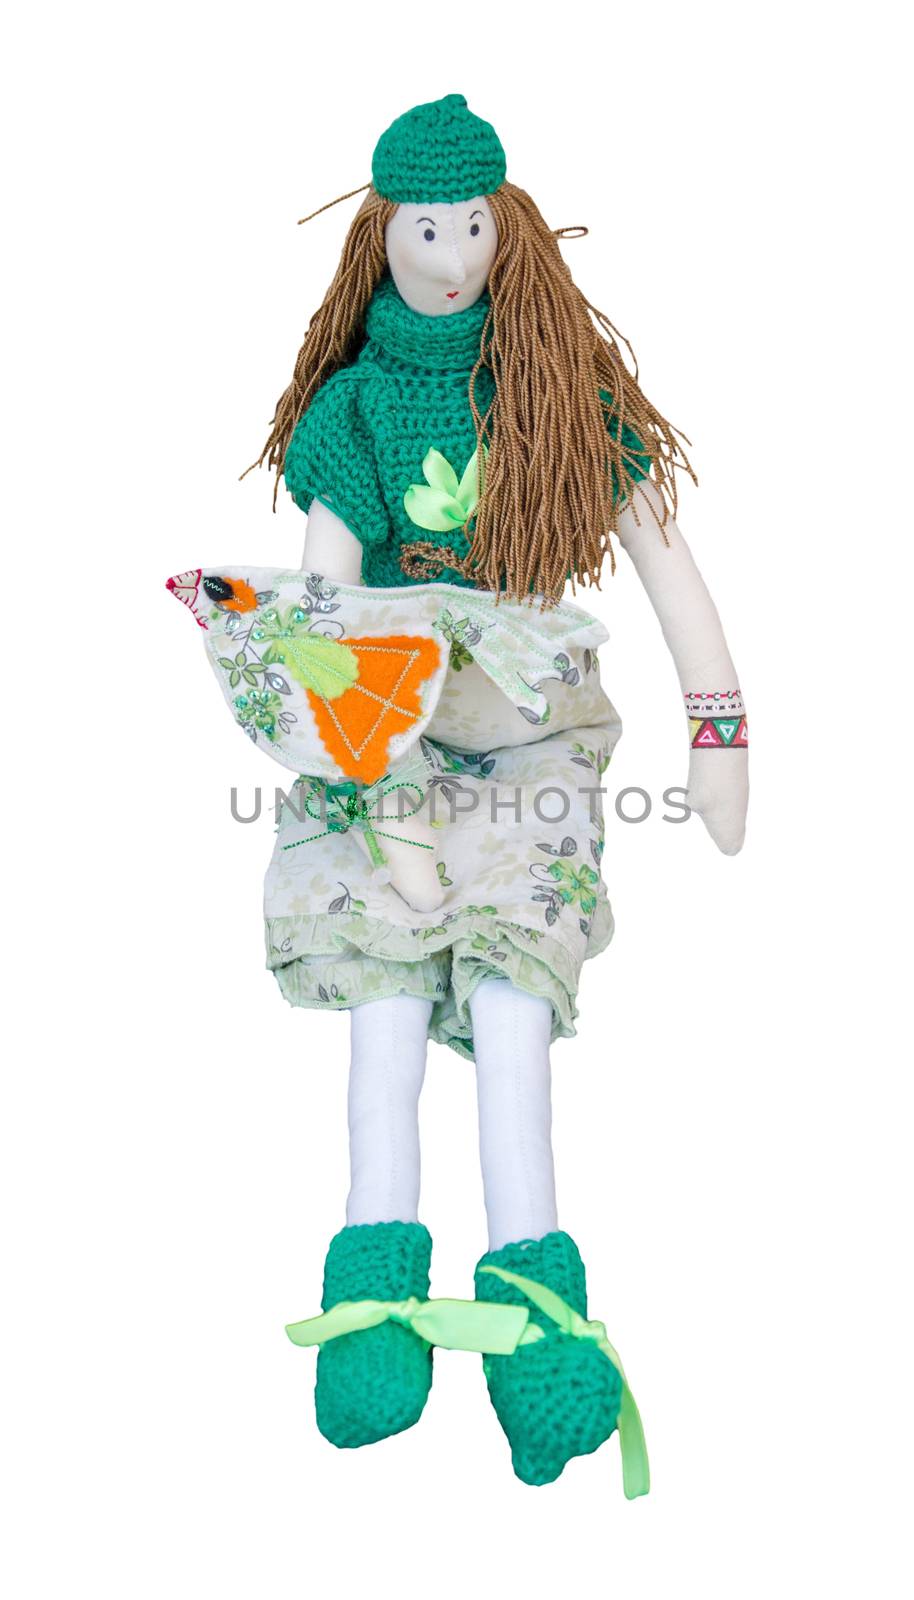 The Handmade doll with a bird on the hand in a dress and sweatersitting isolated